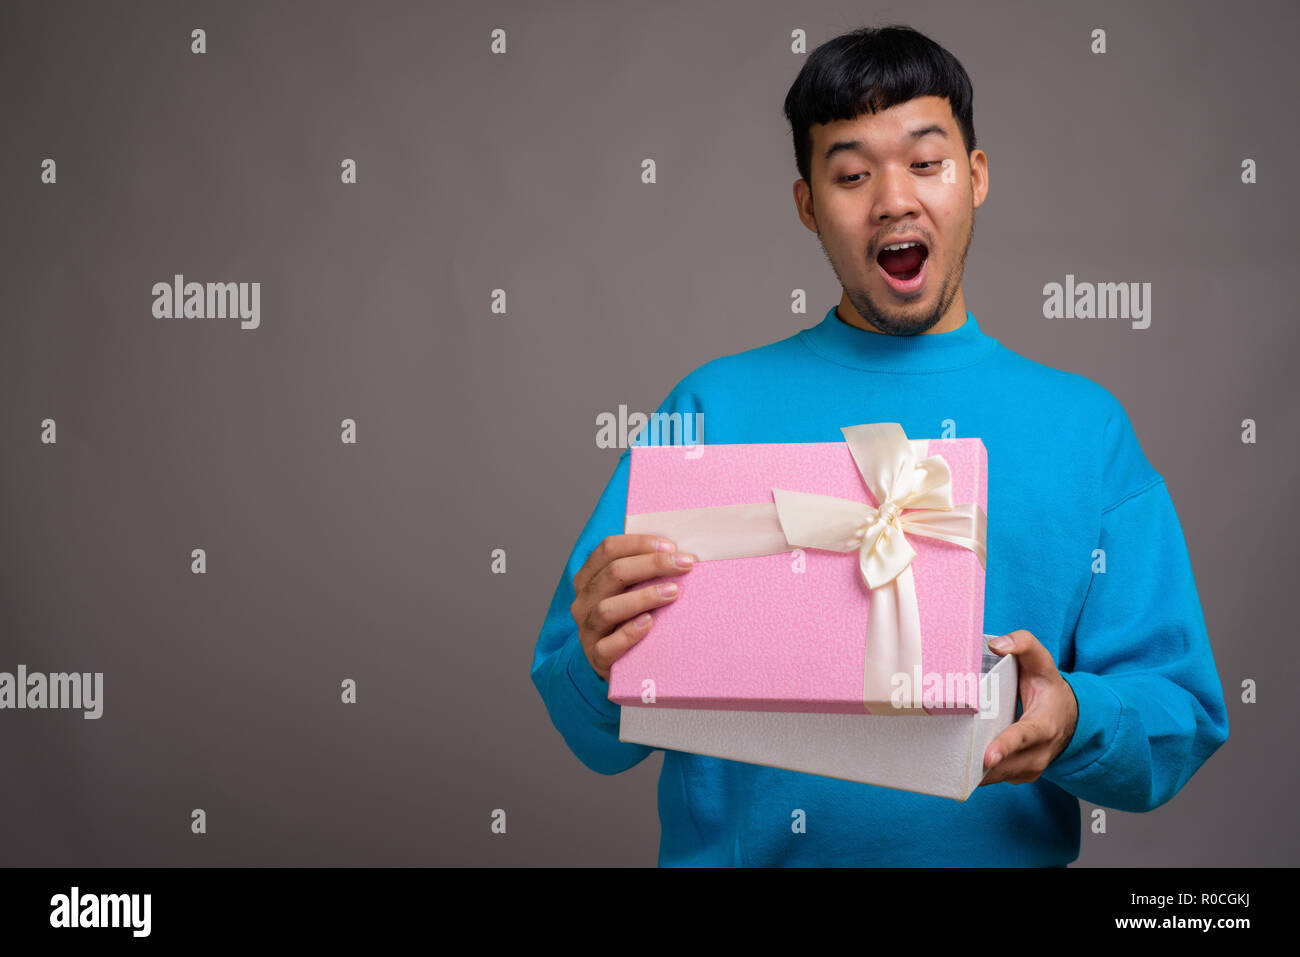 Portrait of young Asian man holding gift box Banque D'Images